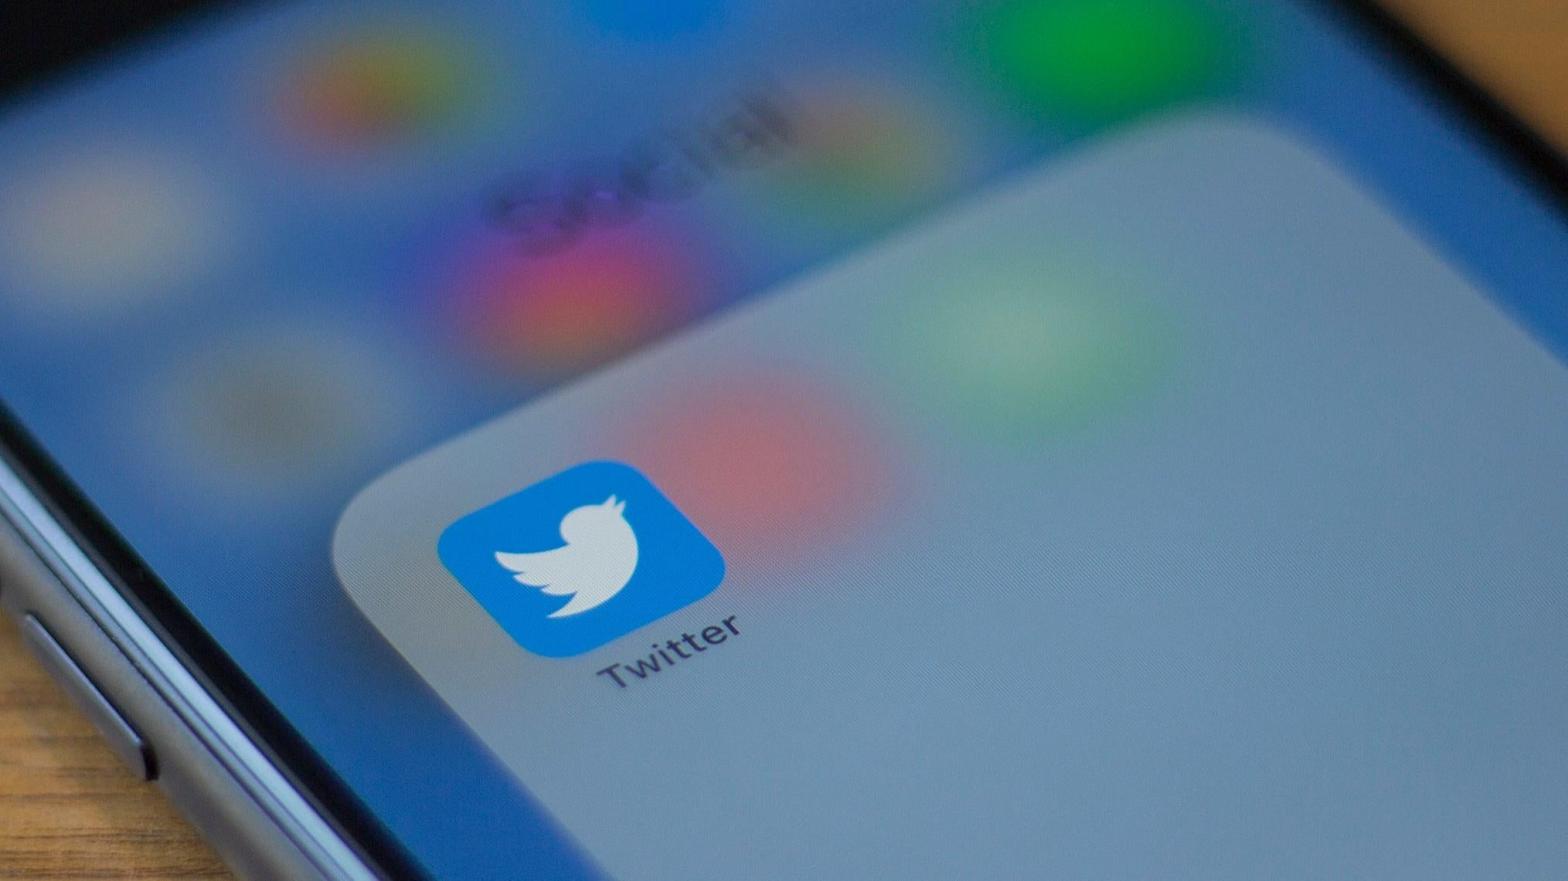 The new blogging tool is Twitter's experiment with longer form content. (Image: Alastair Pike, Getty Images)